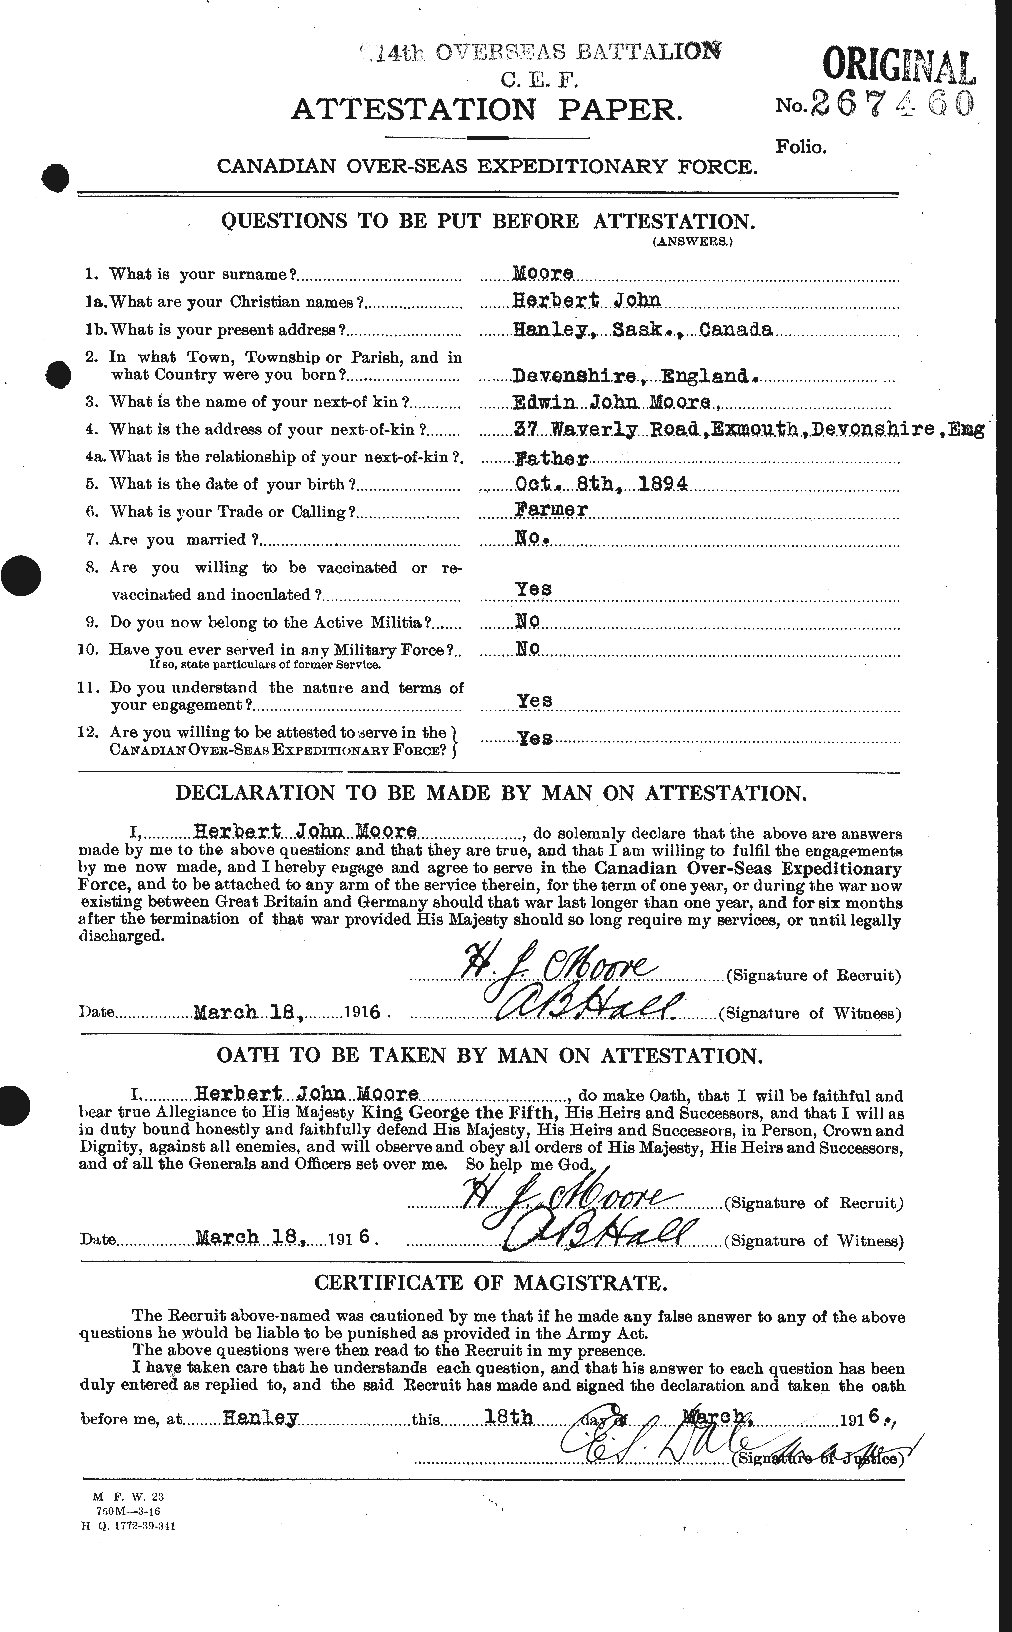 Personnel Records of the First World War - CEF 502118a